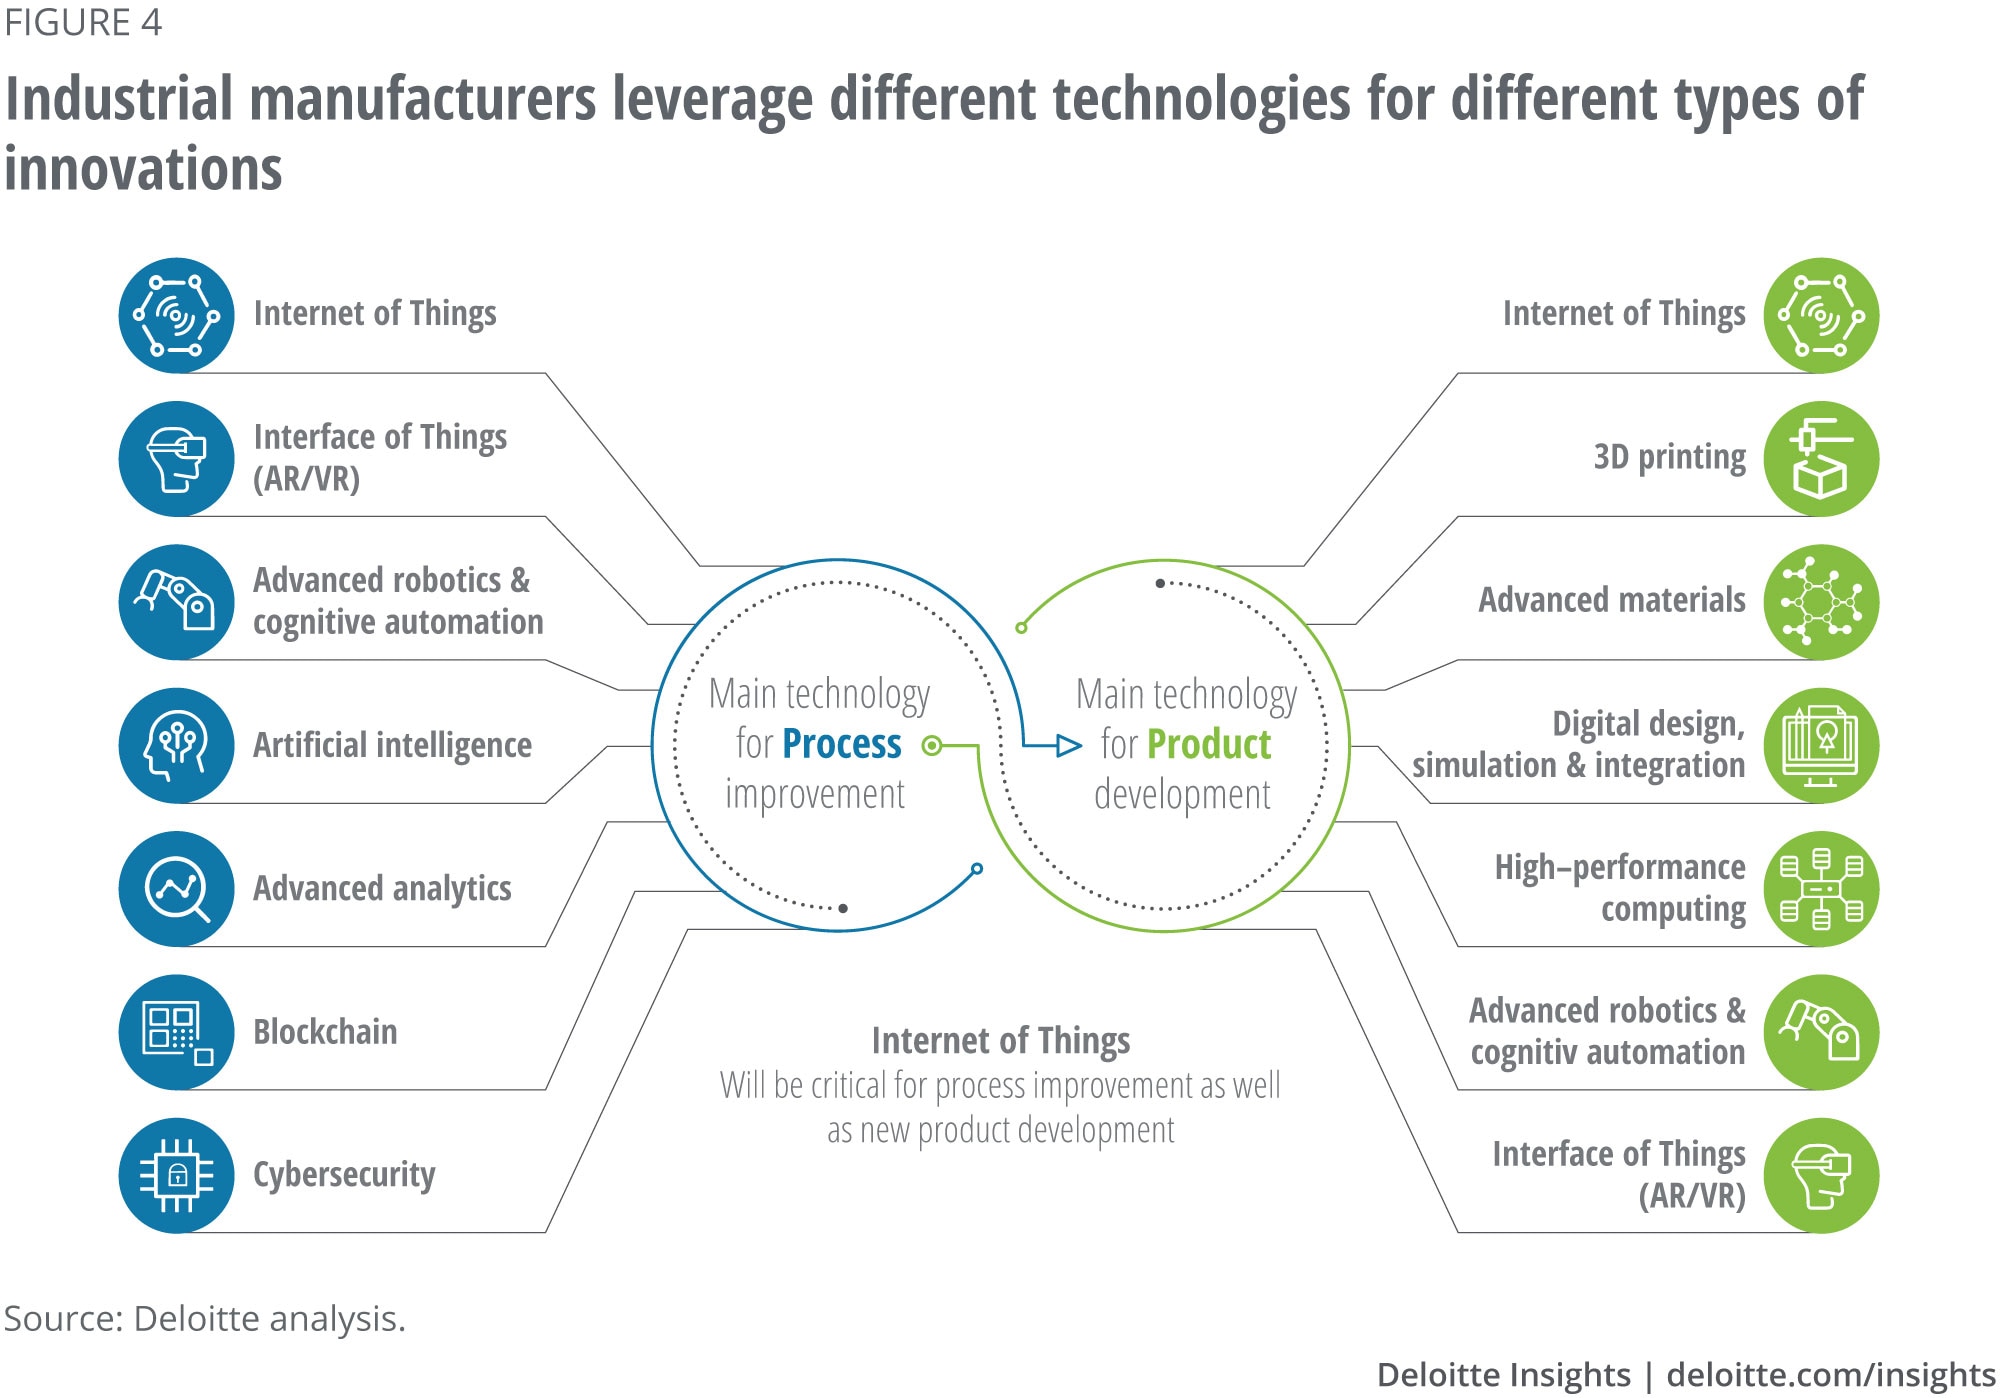 Industrial manufacturers leverage different technologies for different types of innovation